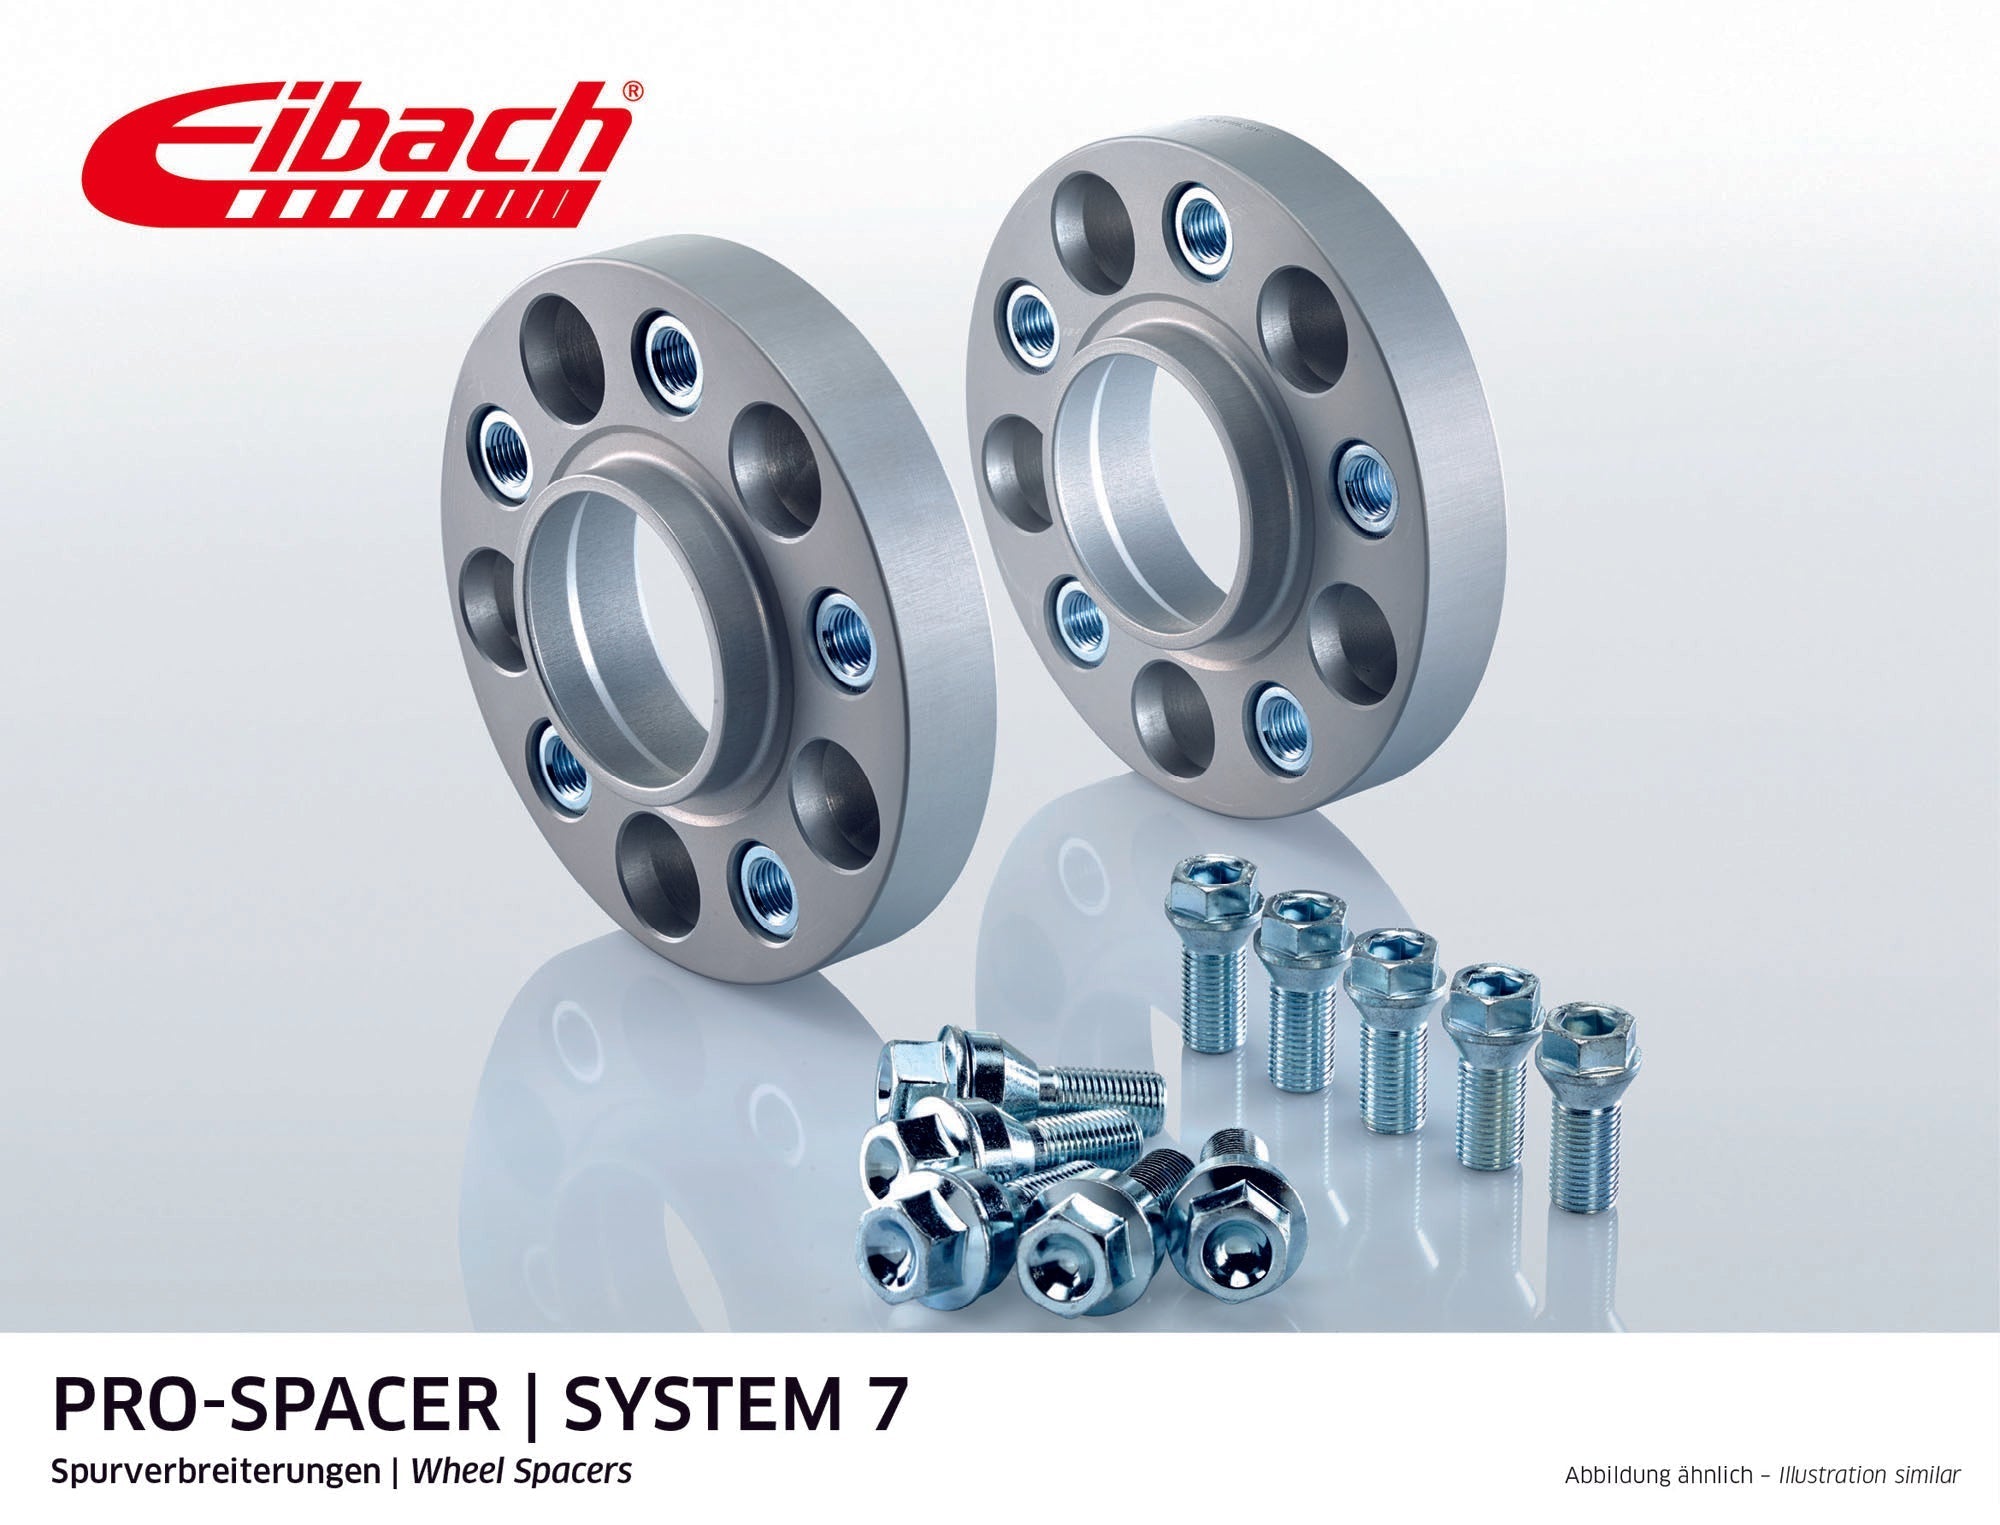 Eibach 23mm Pro-Spacer - Silver Anodized Wheel Spacer 911 1997-05 #S90-7-23-001